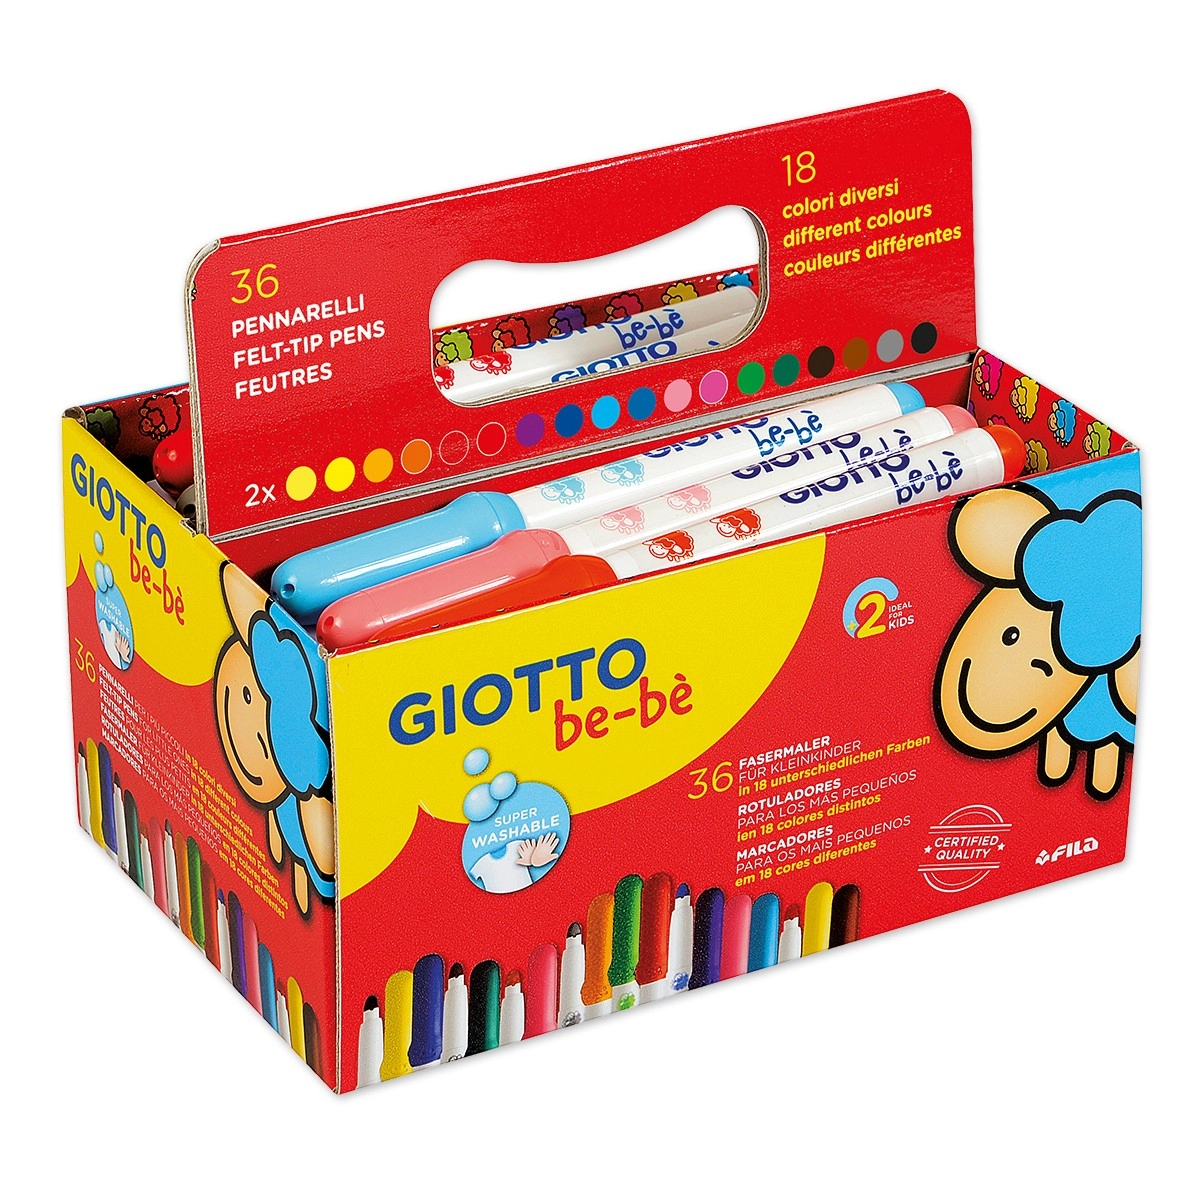 GIOTTO BEBE LAPICES SCHOOLPACK 36 UDS